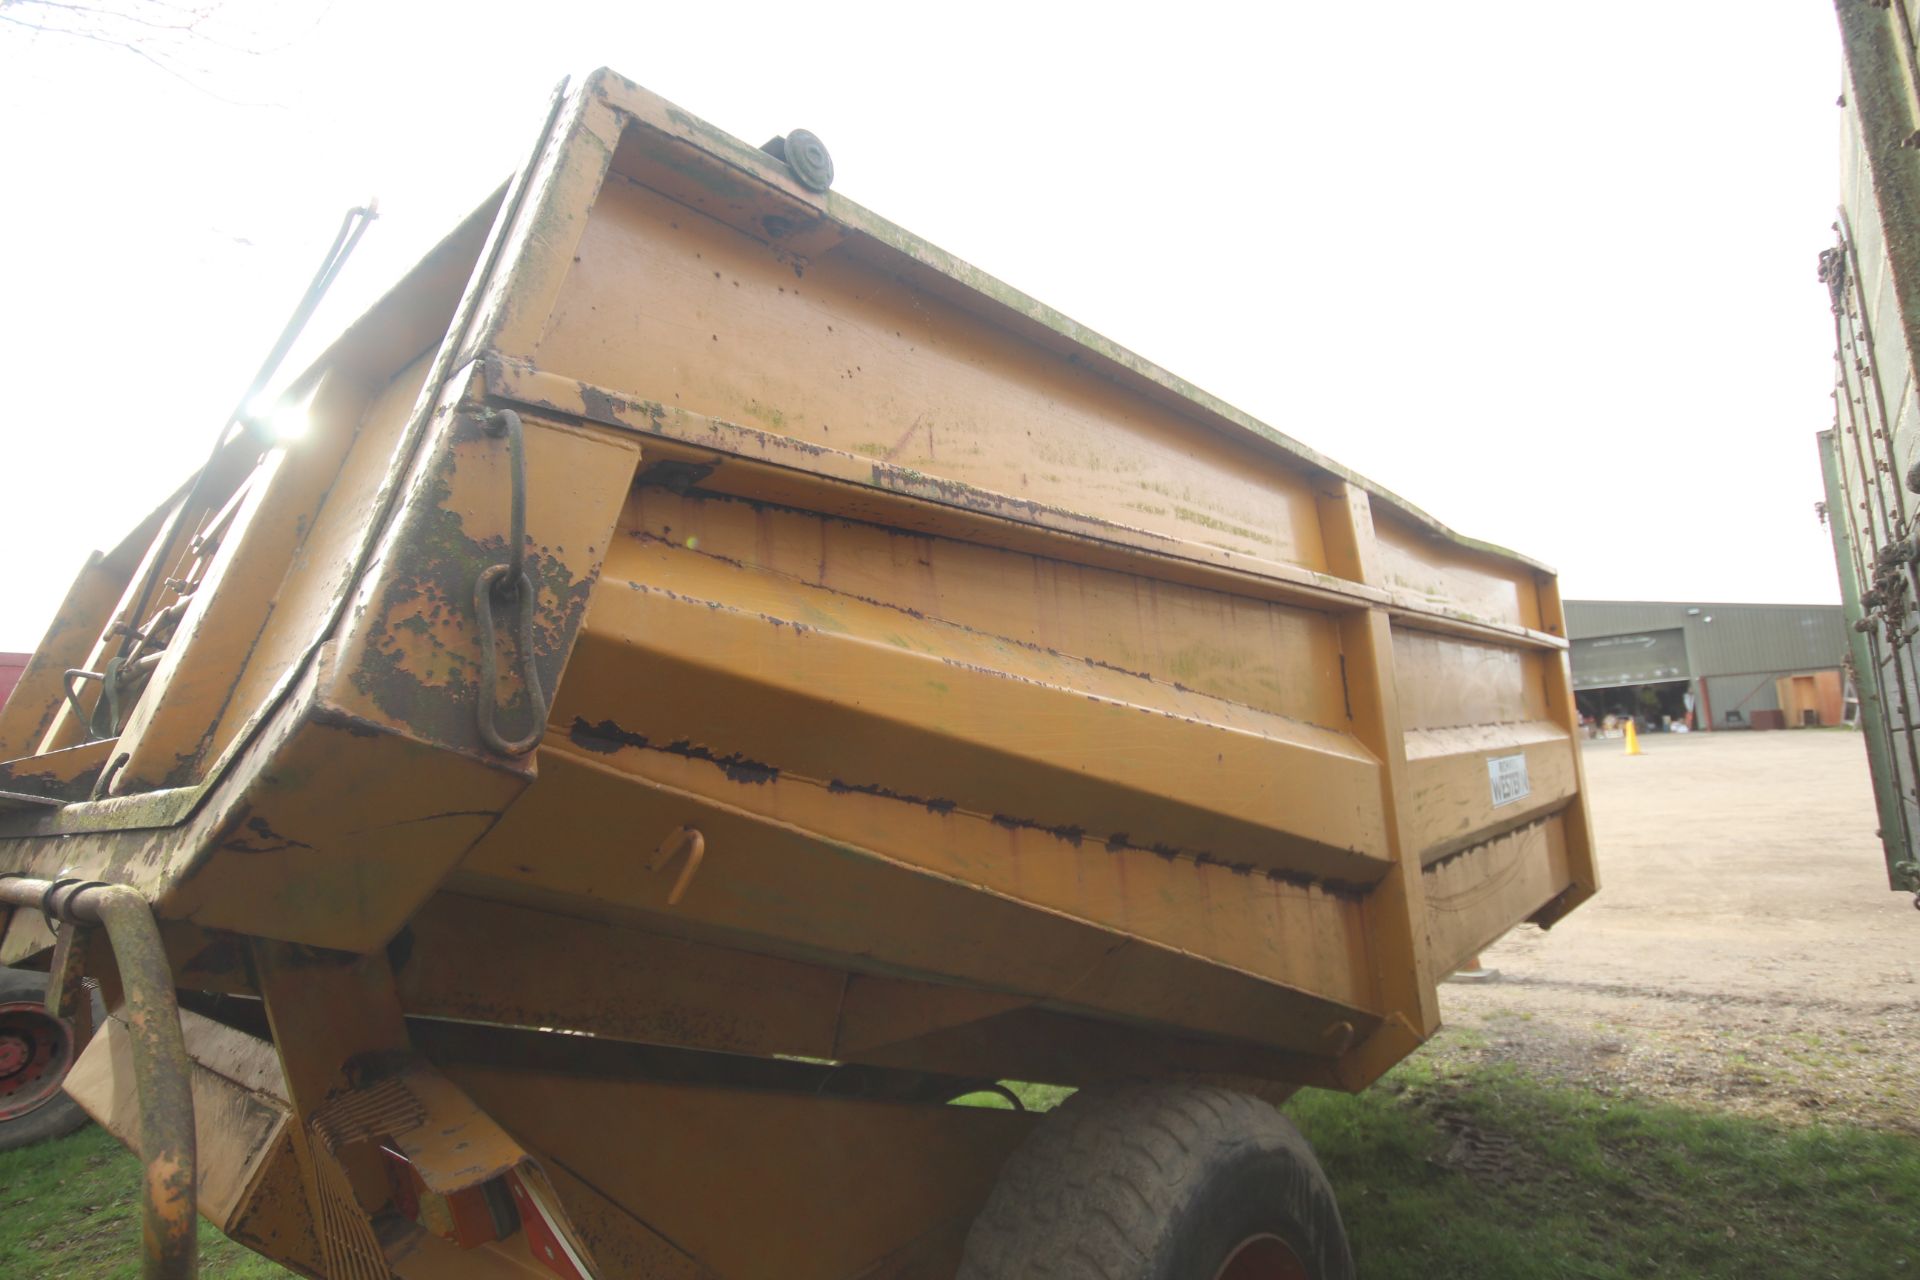 Richard Western 10T single axle dump trailer. 1992. With greedy boards and tailgate. Owned from new. - Image 20 of 23